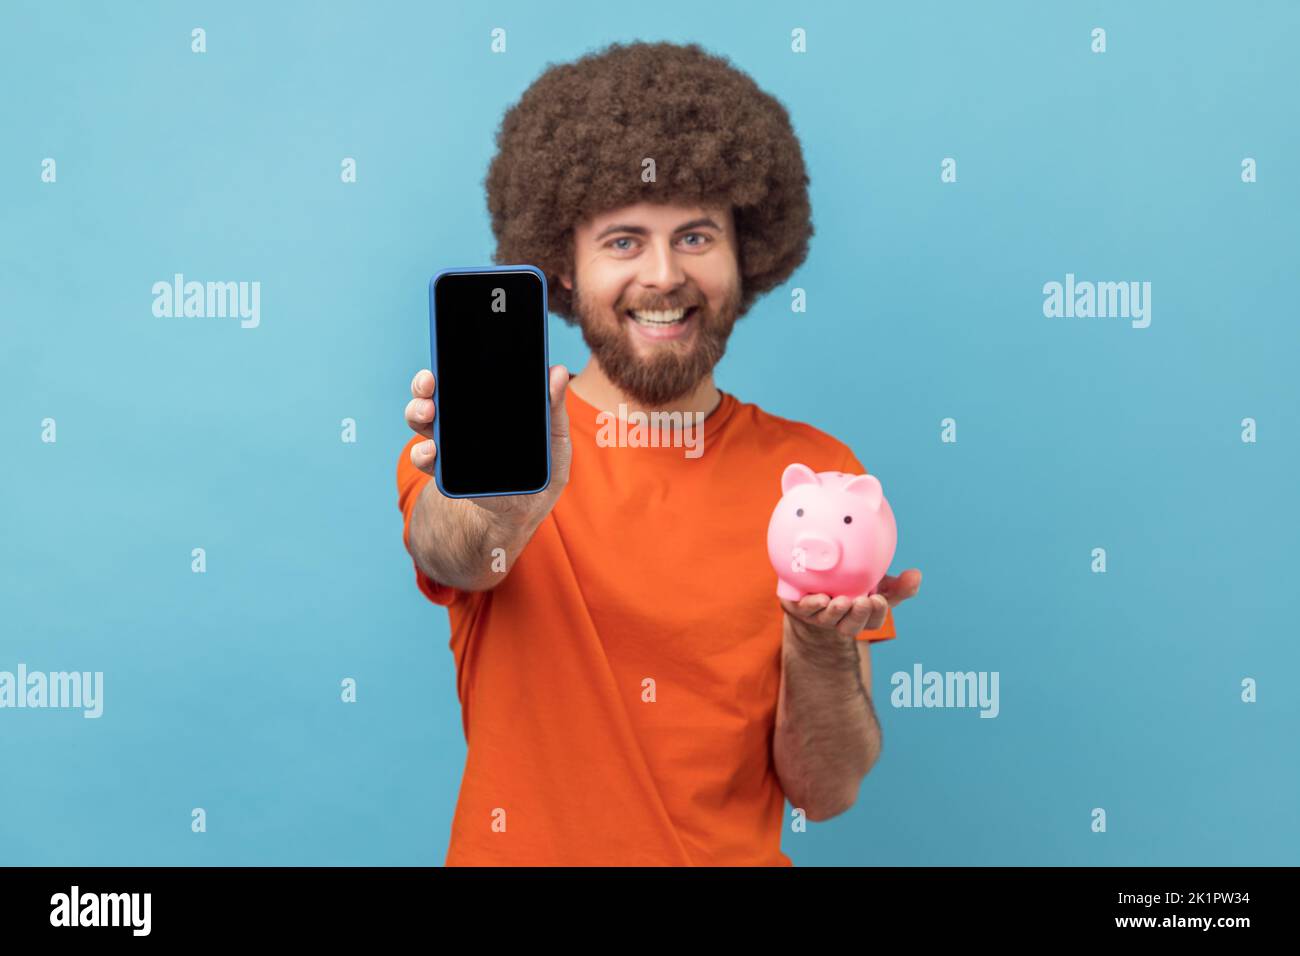 Portrait of happy satisfied man with Afro hairstyle in orange T-shirt holding in hands piggy bank and smart phone with empty screen for advertisement. Indoor studio shot isolated on blue background. Stock Photo